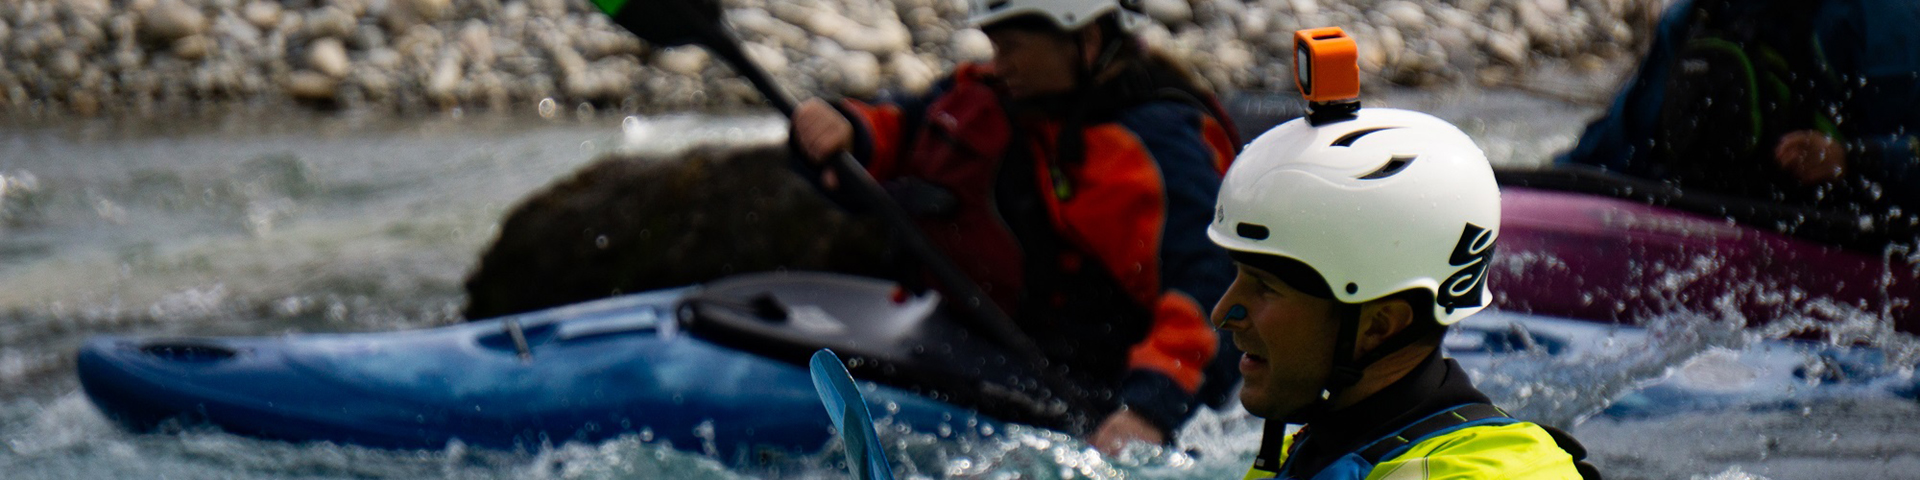 FIVE DAY WHITEWATER KAYAKING COURSE by Aquabatics - Image 409